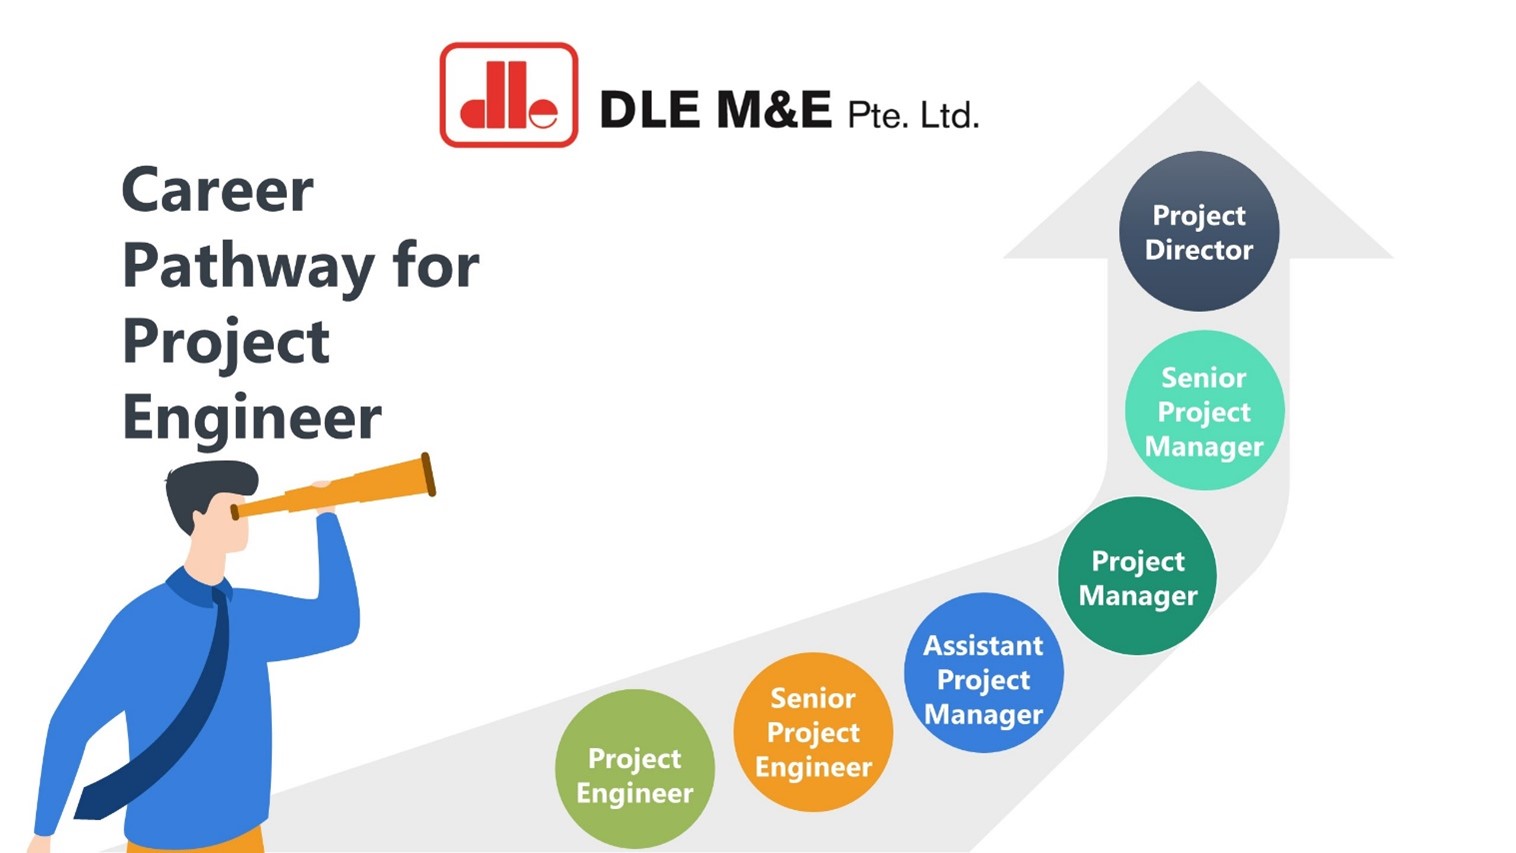 dle career pathway